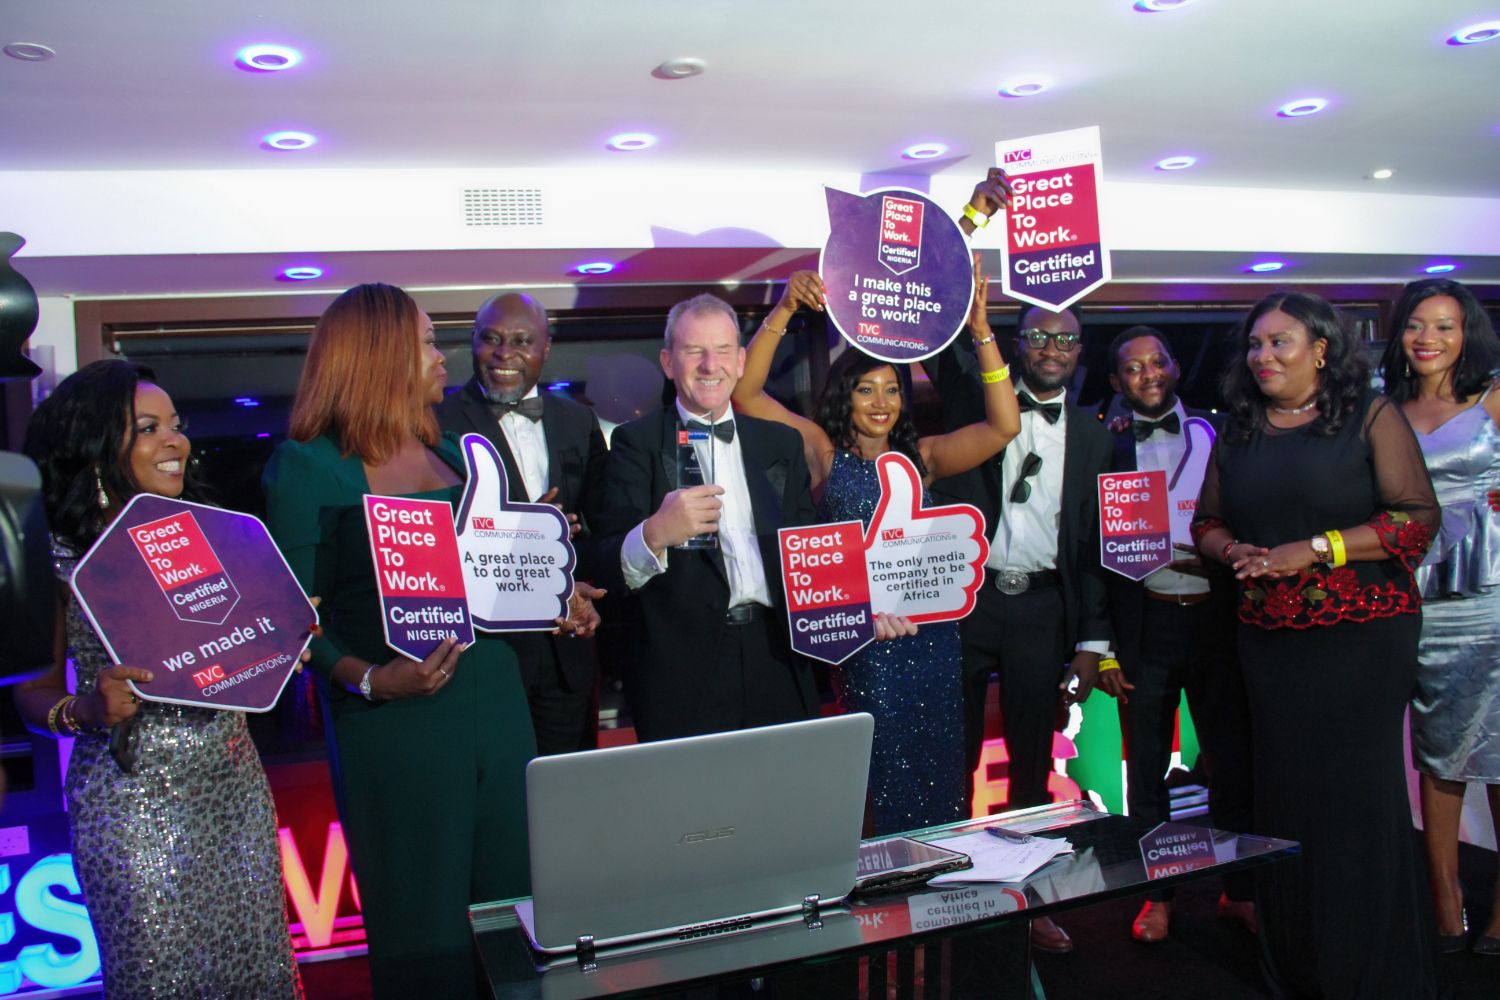 Best Workplaces in Nigeria 2020 | Great Place To Work - English